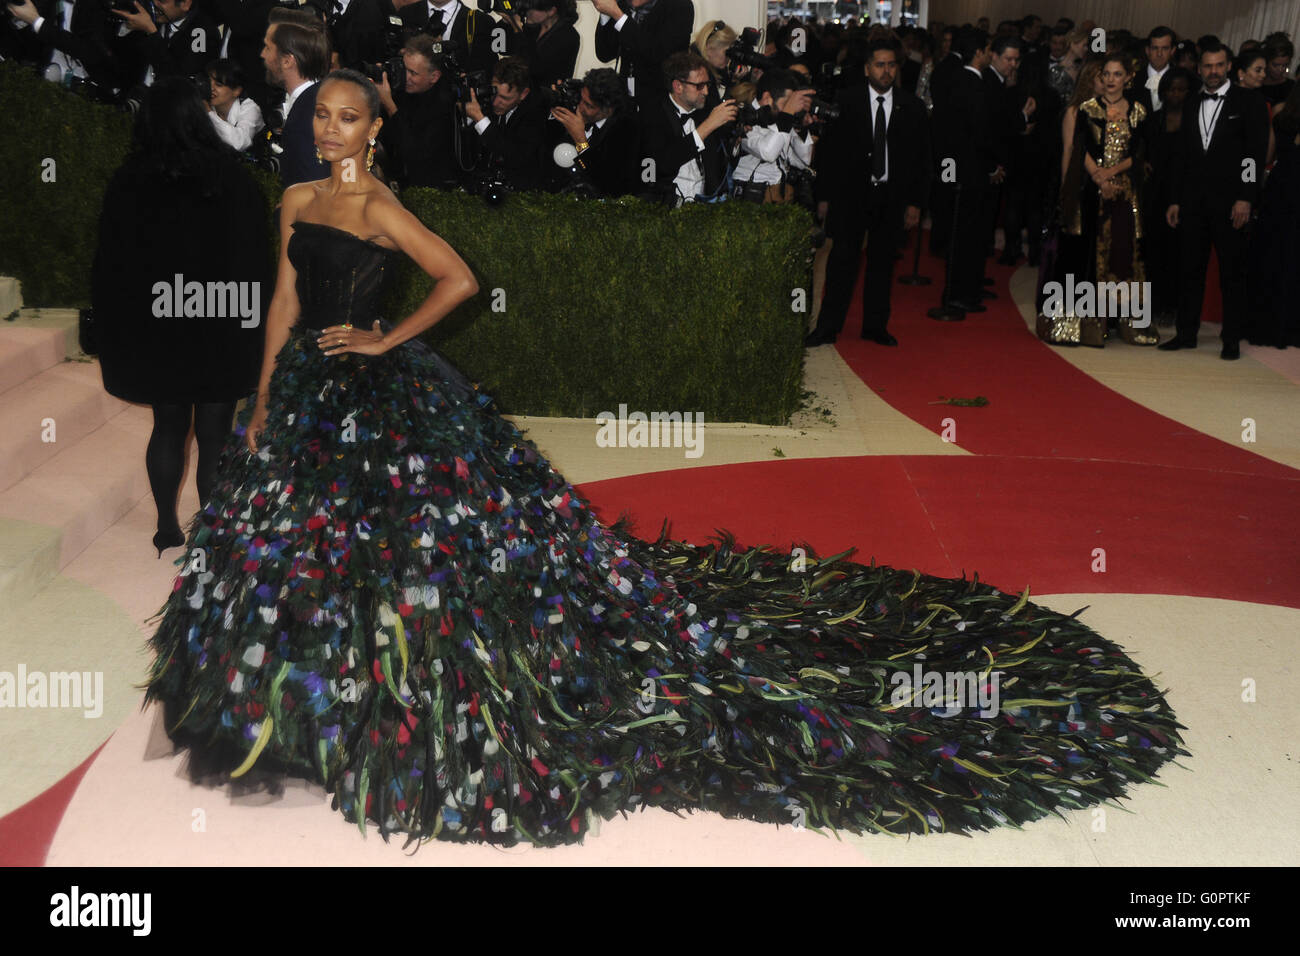 New York City. 2nd May, 2016. Zoe Saldana attending the 'Manus x Machina: Fashion In An Age Of Technology' Costume Institute Gala at Metropolitan Museum of Art on May 2, 2016 in New York City. | usage worldwide © dpa/Alamy Live News Stock Photo